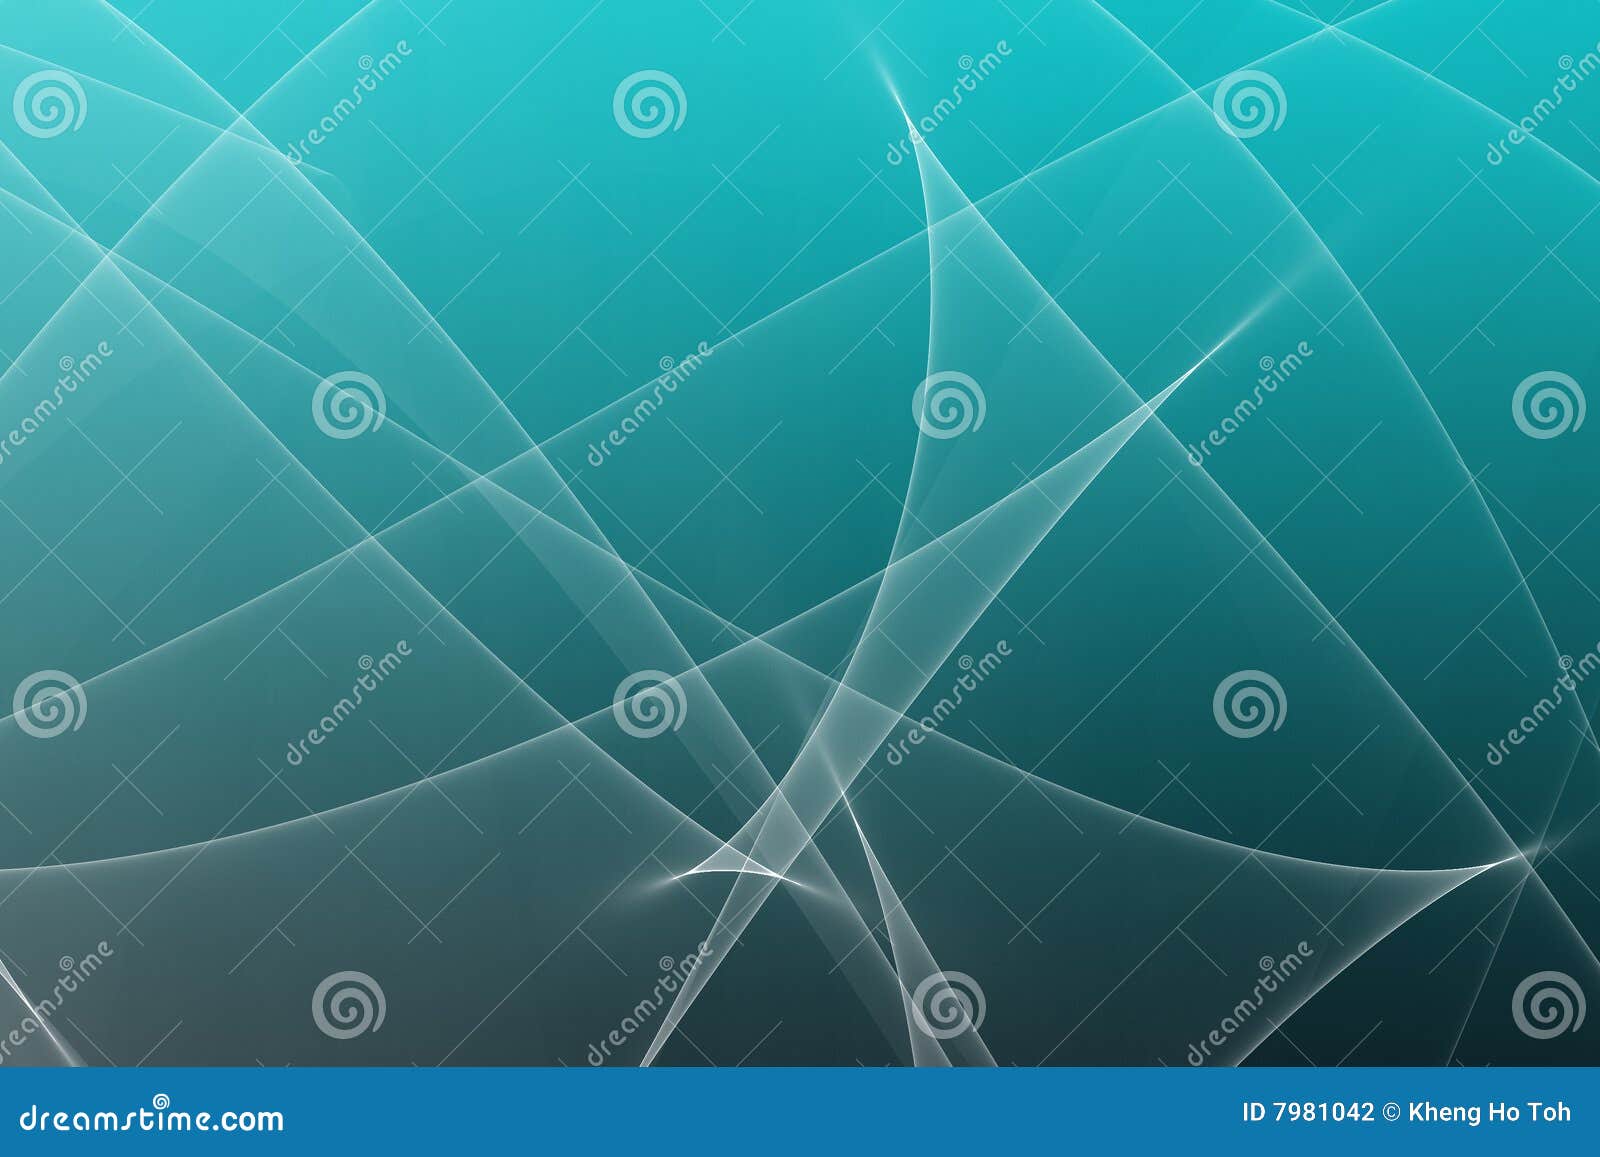 soothing abstract glowing lines background